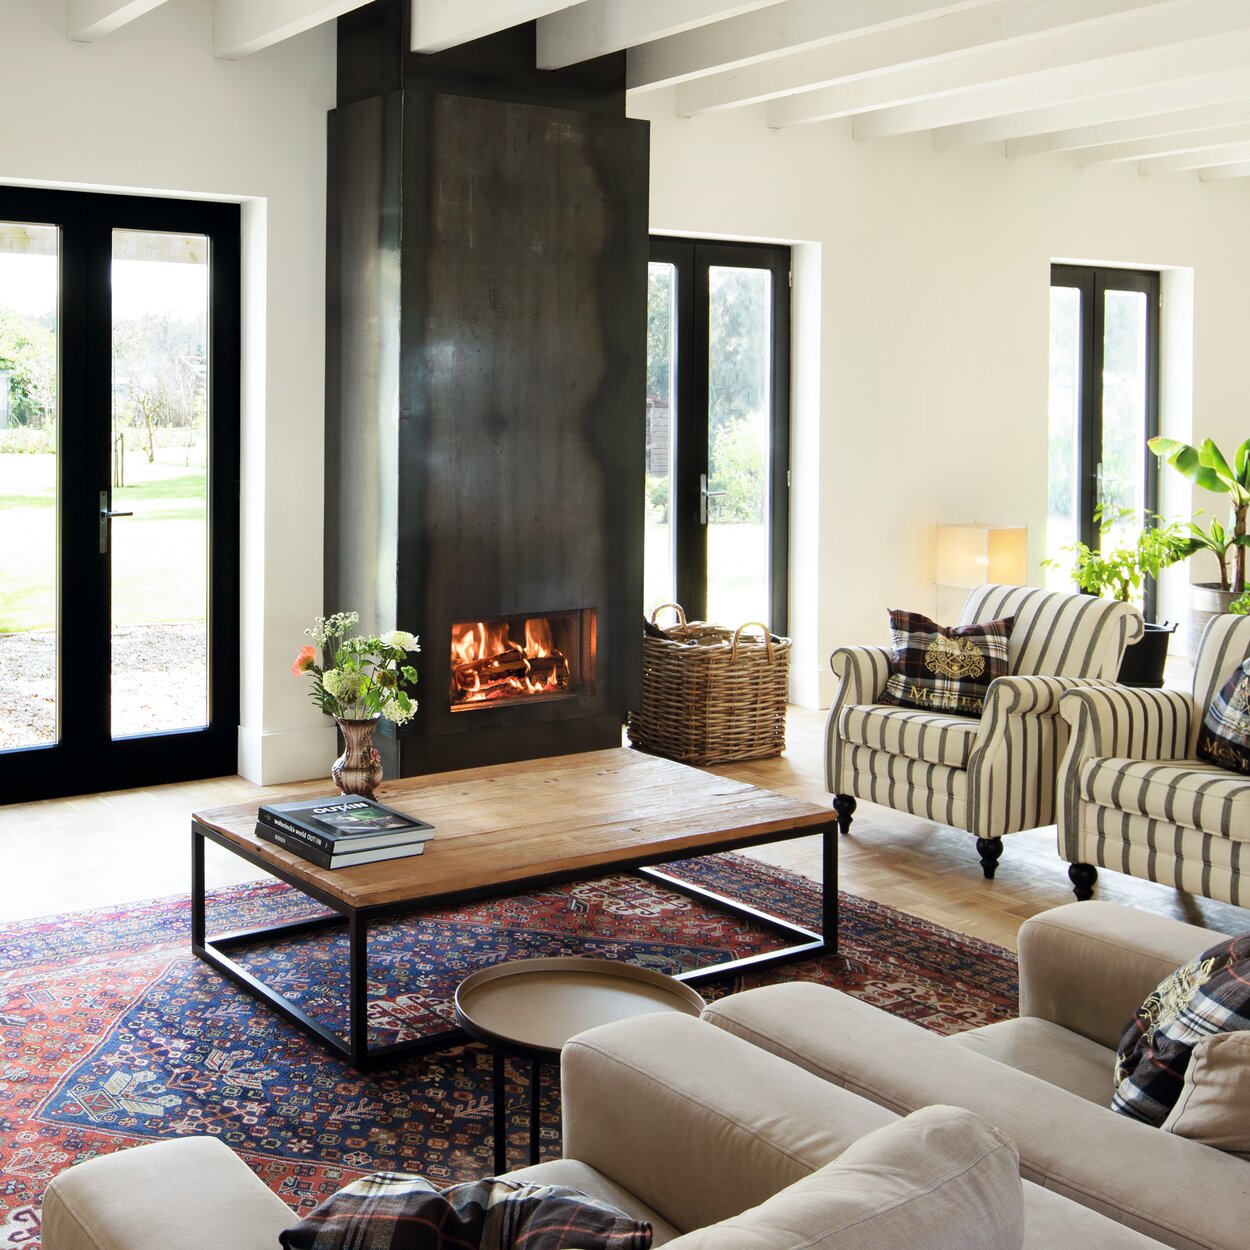 Wood fireplace W70/33F by Kalfire in a large, bright living room with black steel cladding and classic armchairs